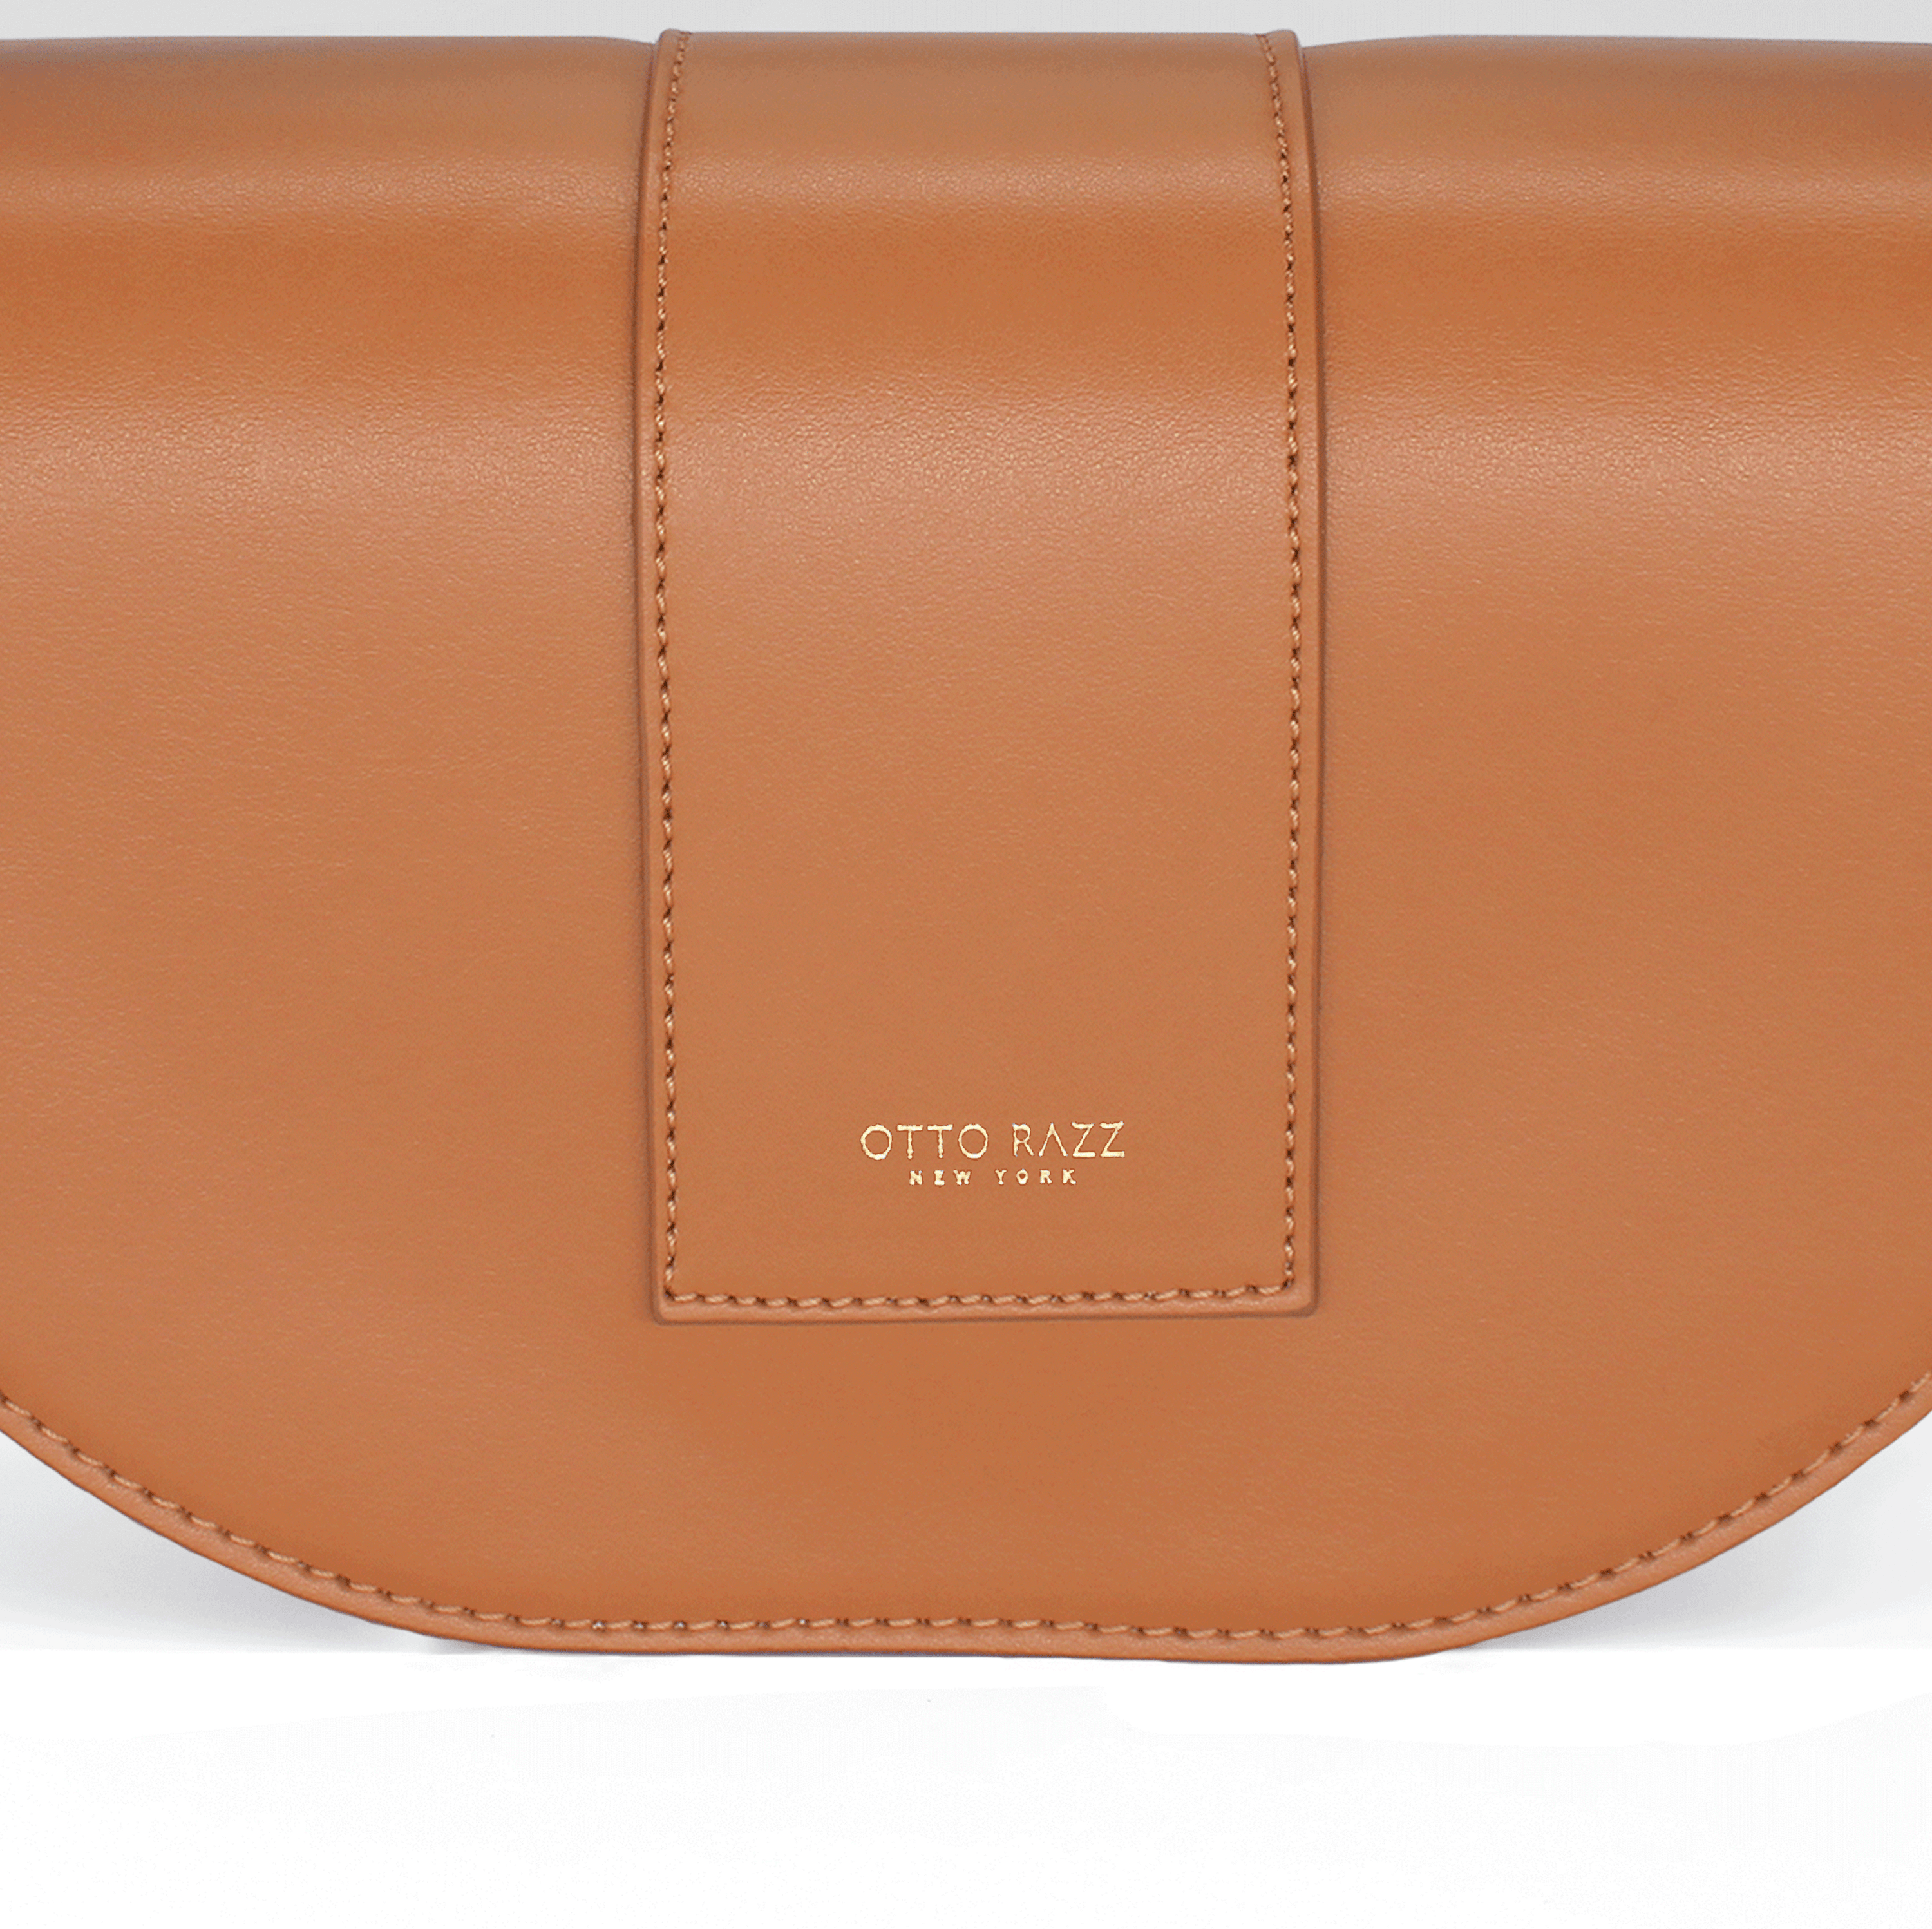 Madison Bag In Smooth Tan Apple Leather